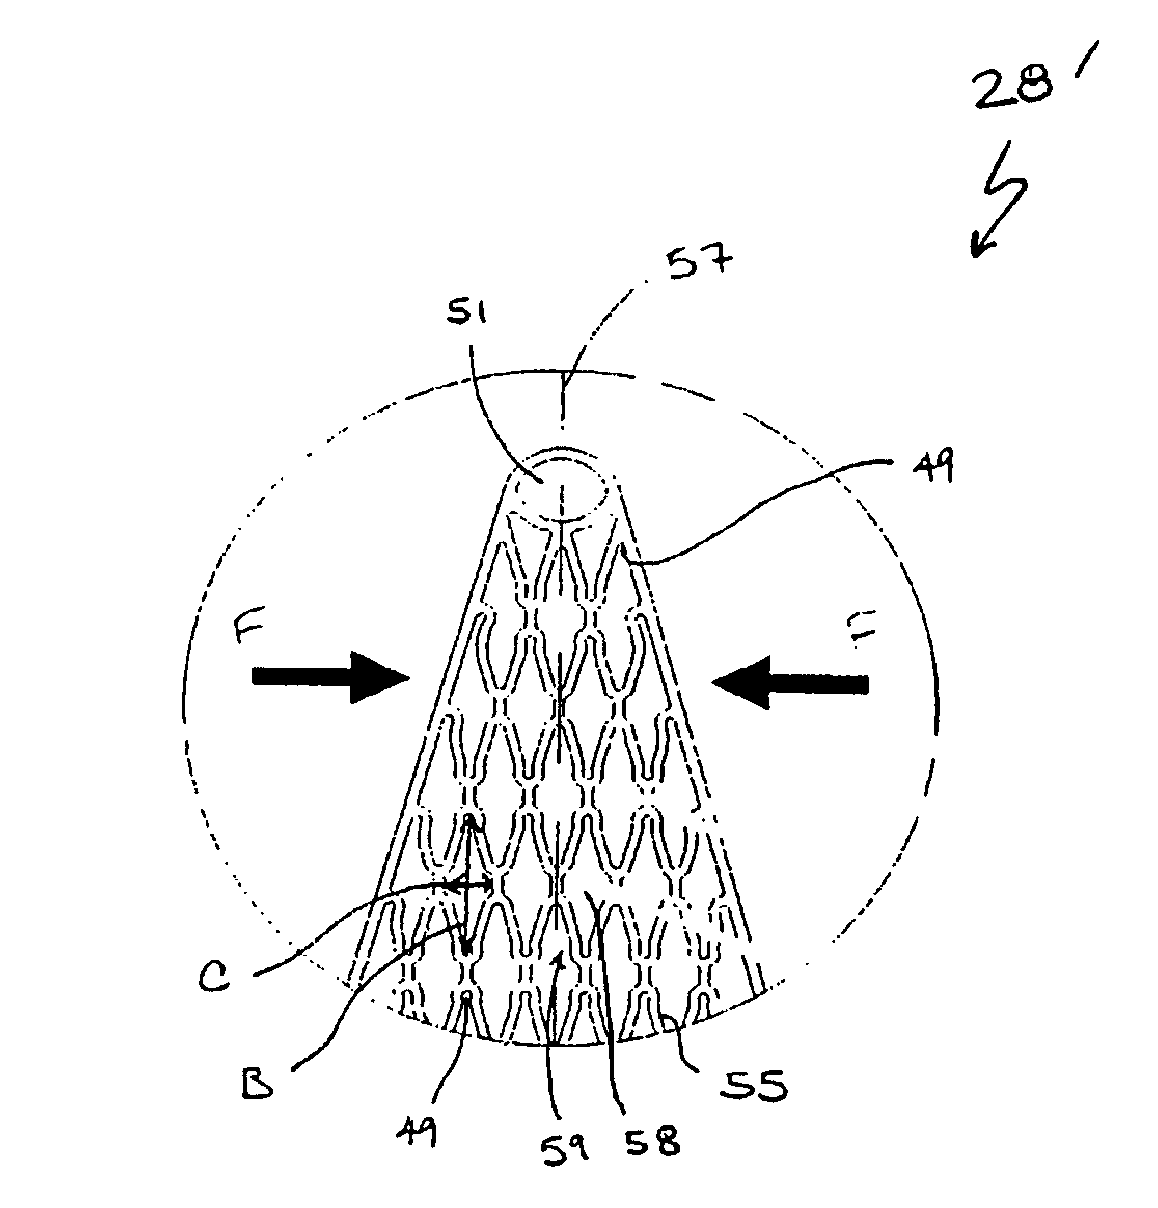 Vascular Prosthesis and Methods of Use